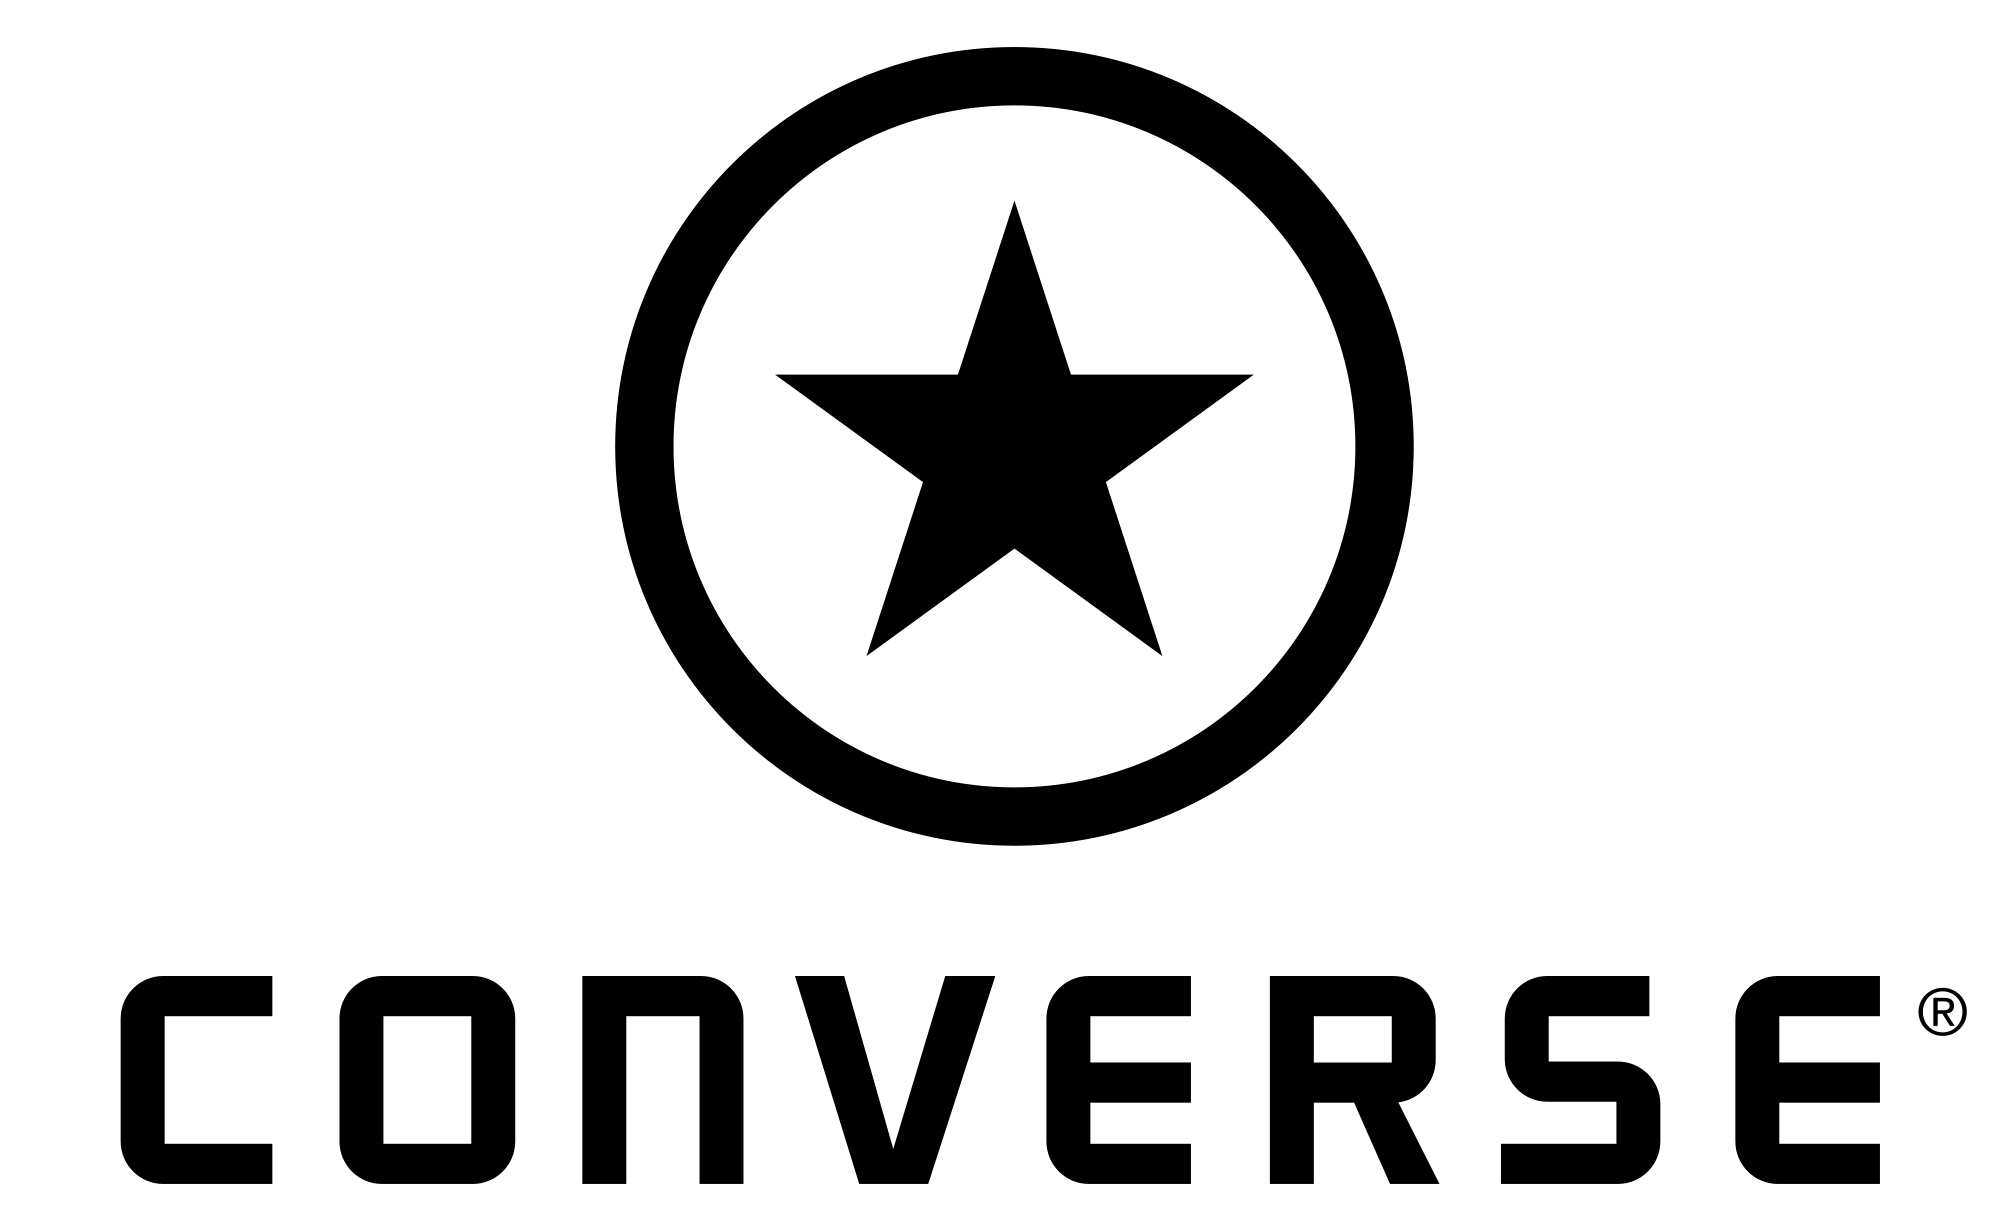 Famous Black and White Logo - Converse Logo, Converse Symbol Meaning, History and Evolution